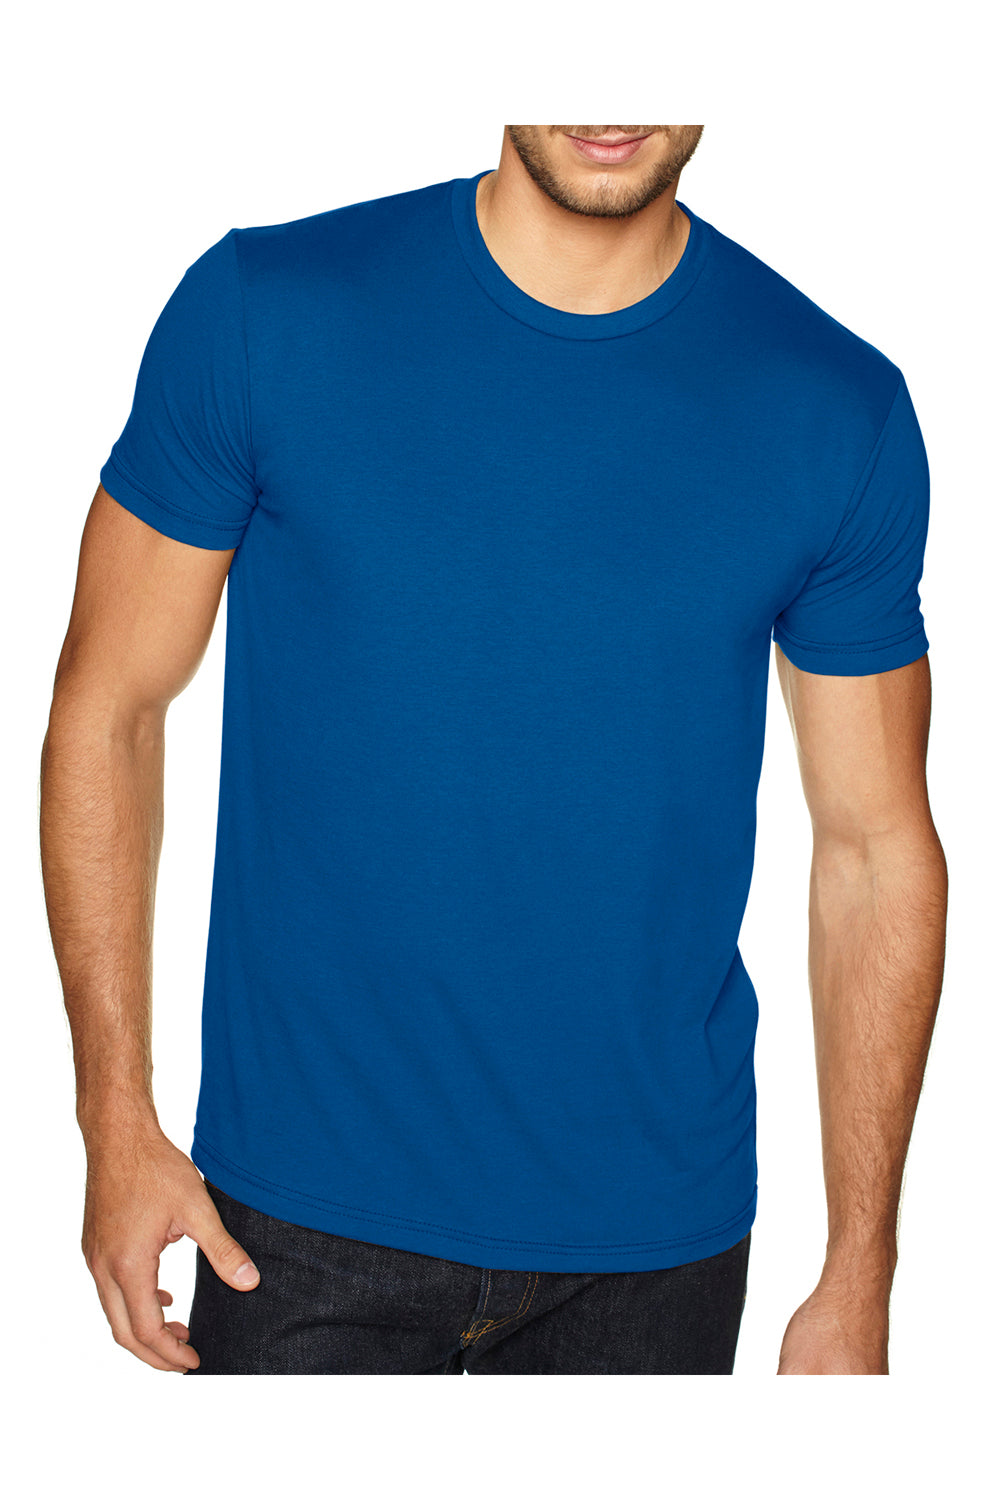 Next Level 6410 Mens Sueded Jersey Short Sleeve Crewneck T-Shirt Cool Blue Front